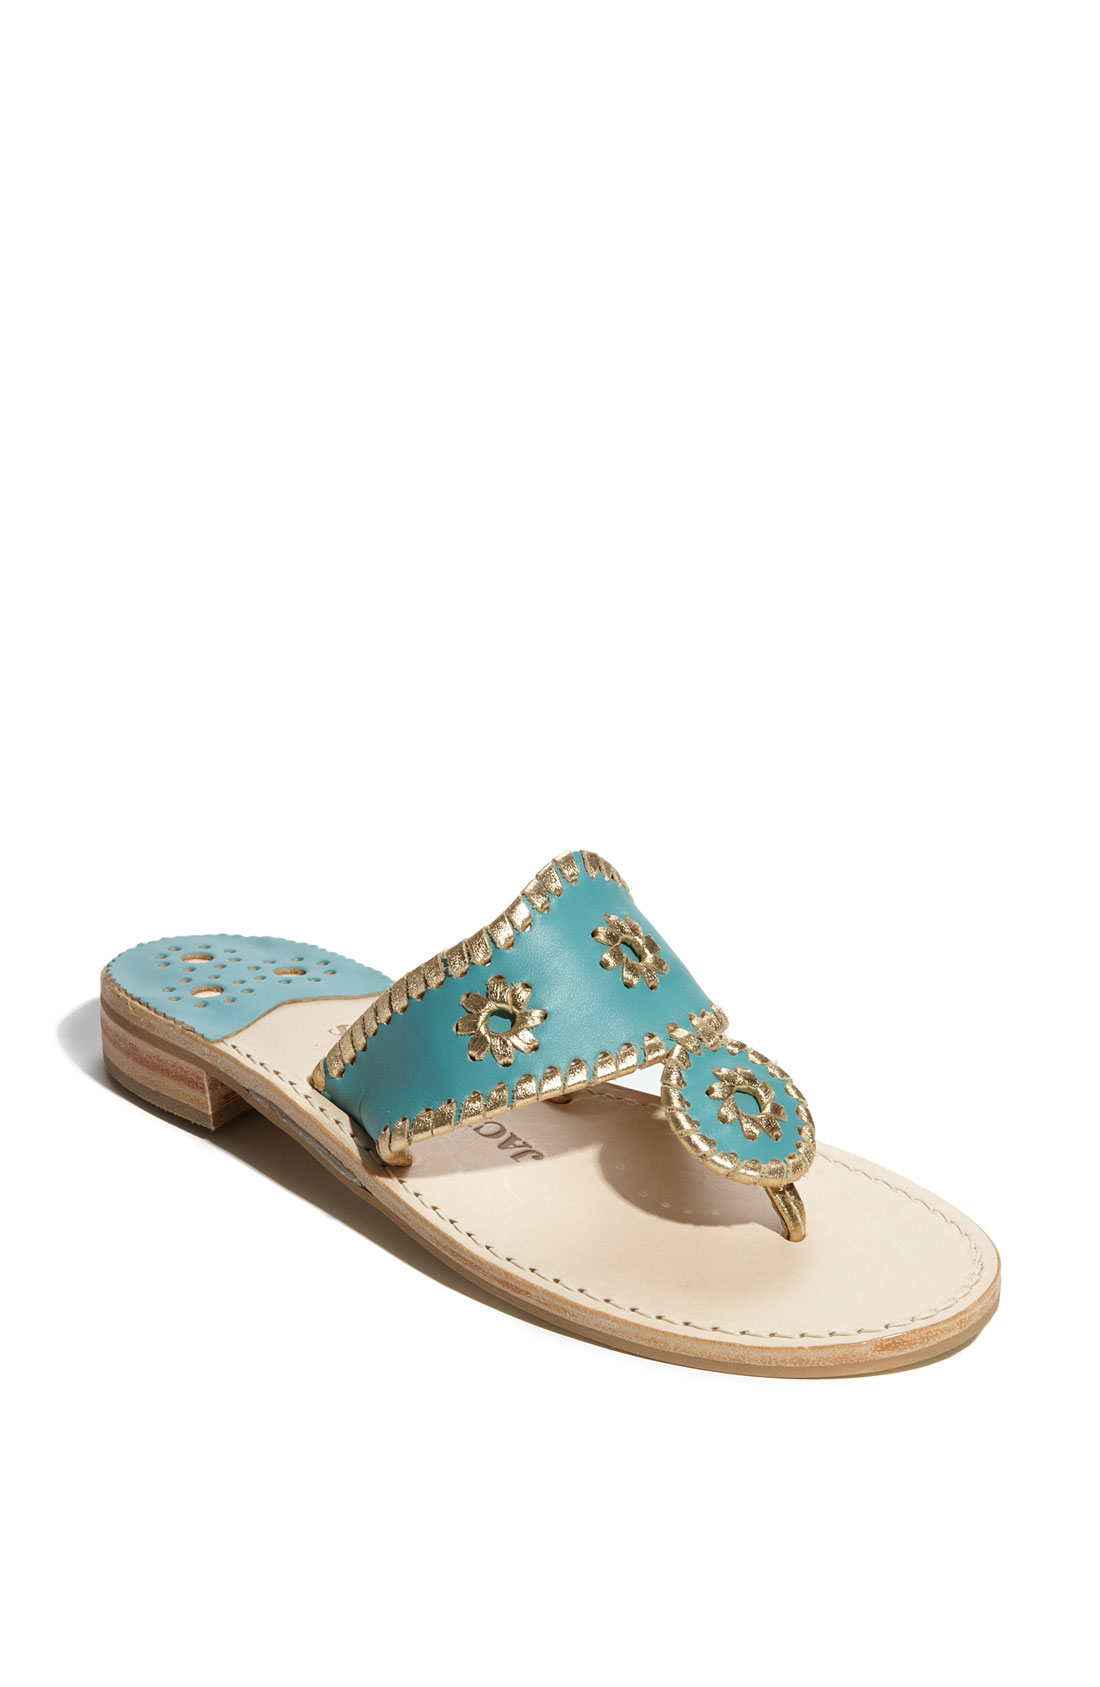 Jack rogers Rio Navajo Sandal in Blue (turquoise gold) | Lyst